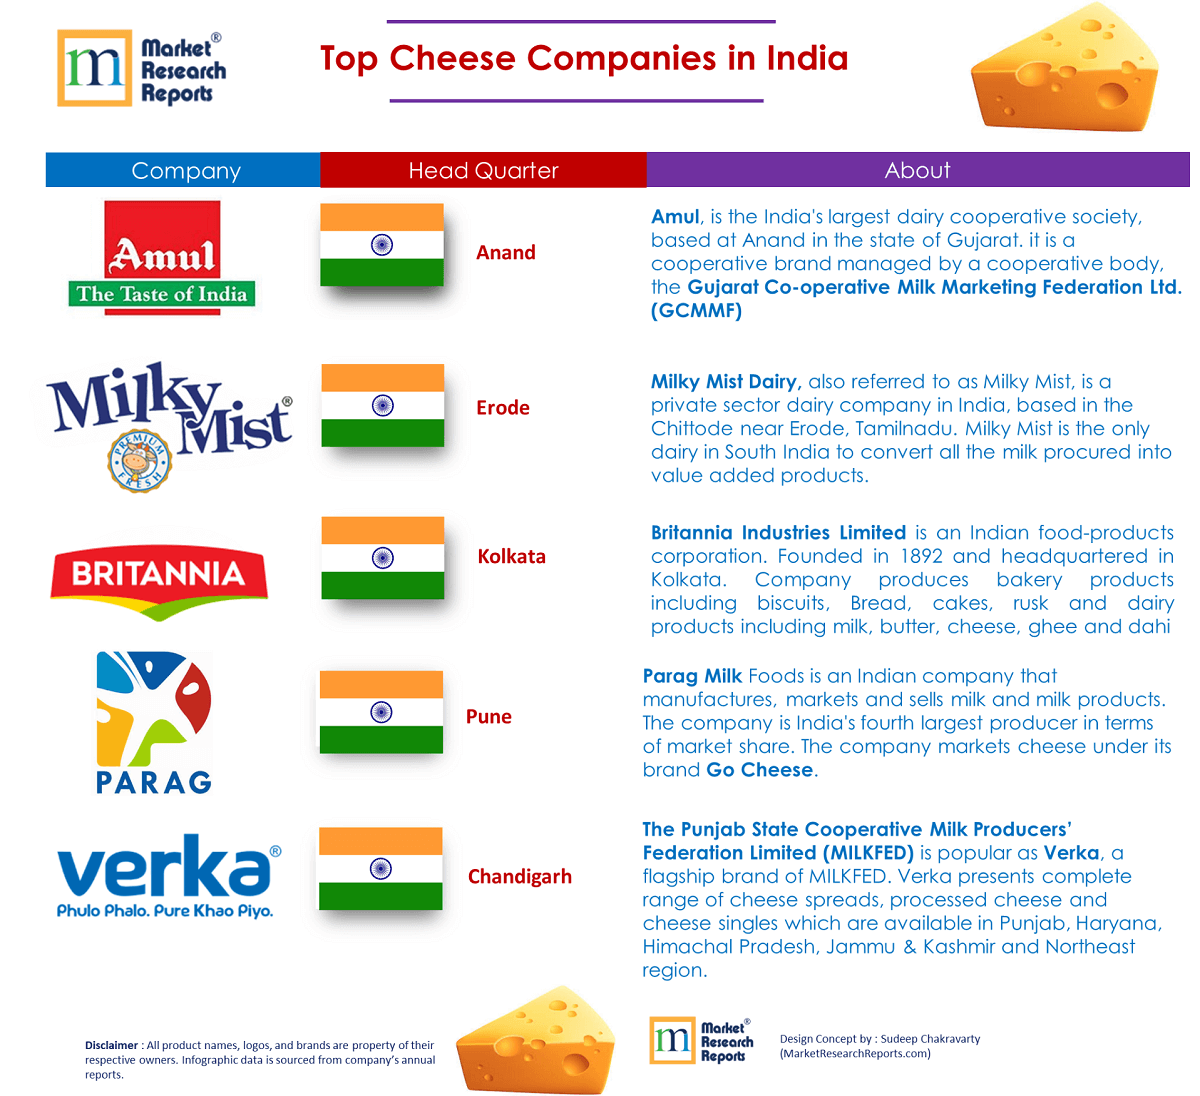 Top five Cheese Companies in India